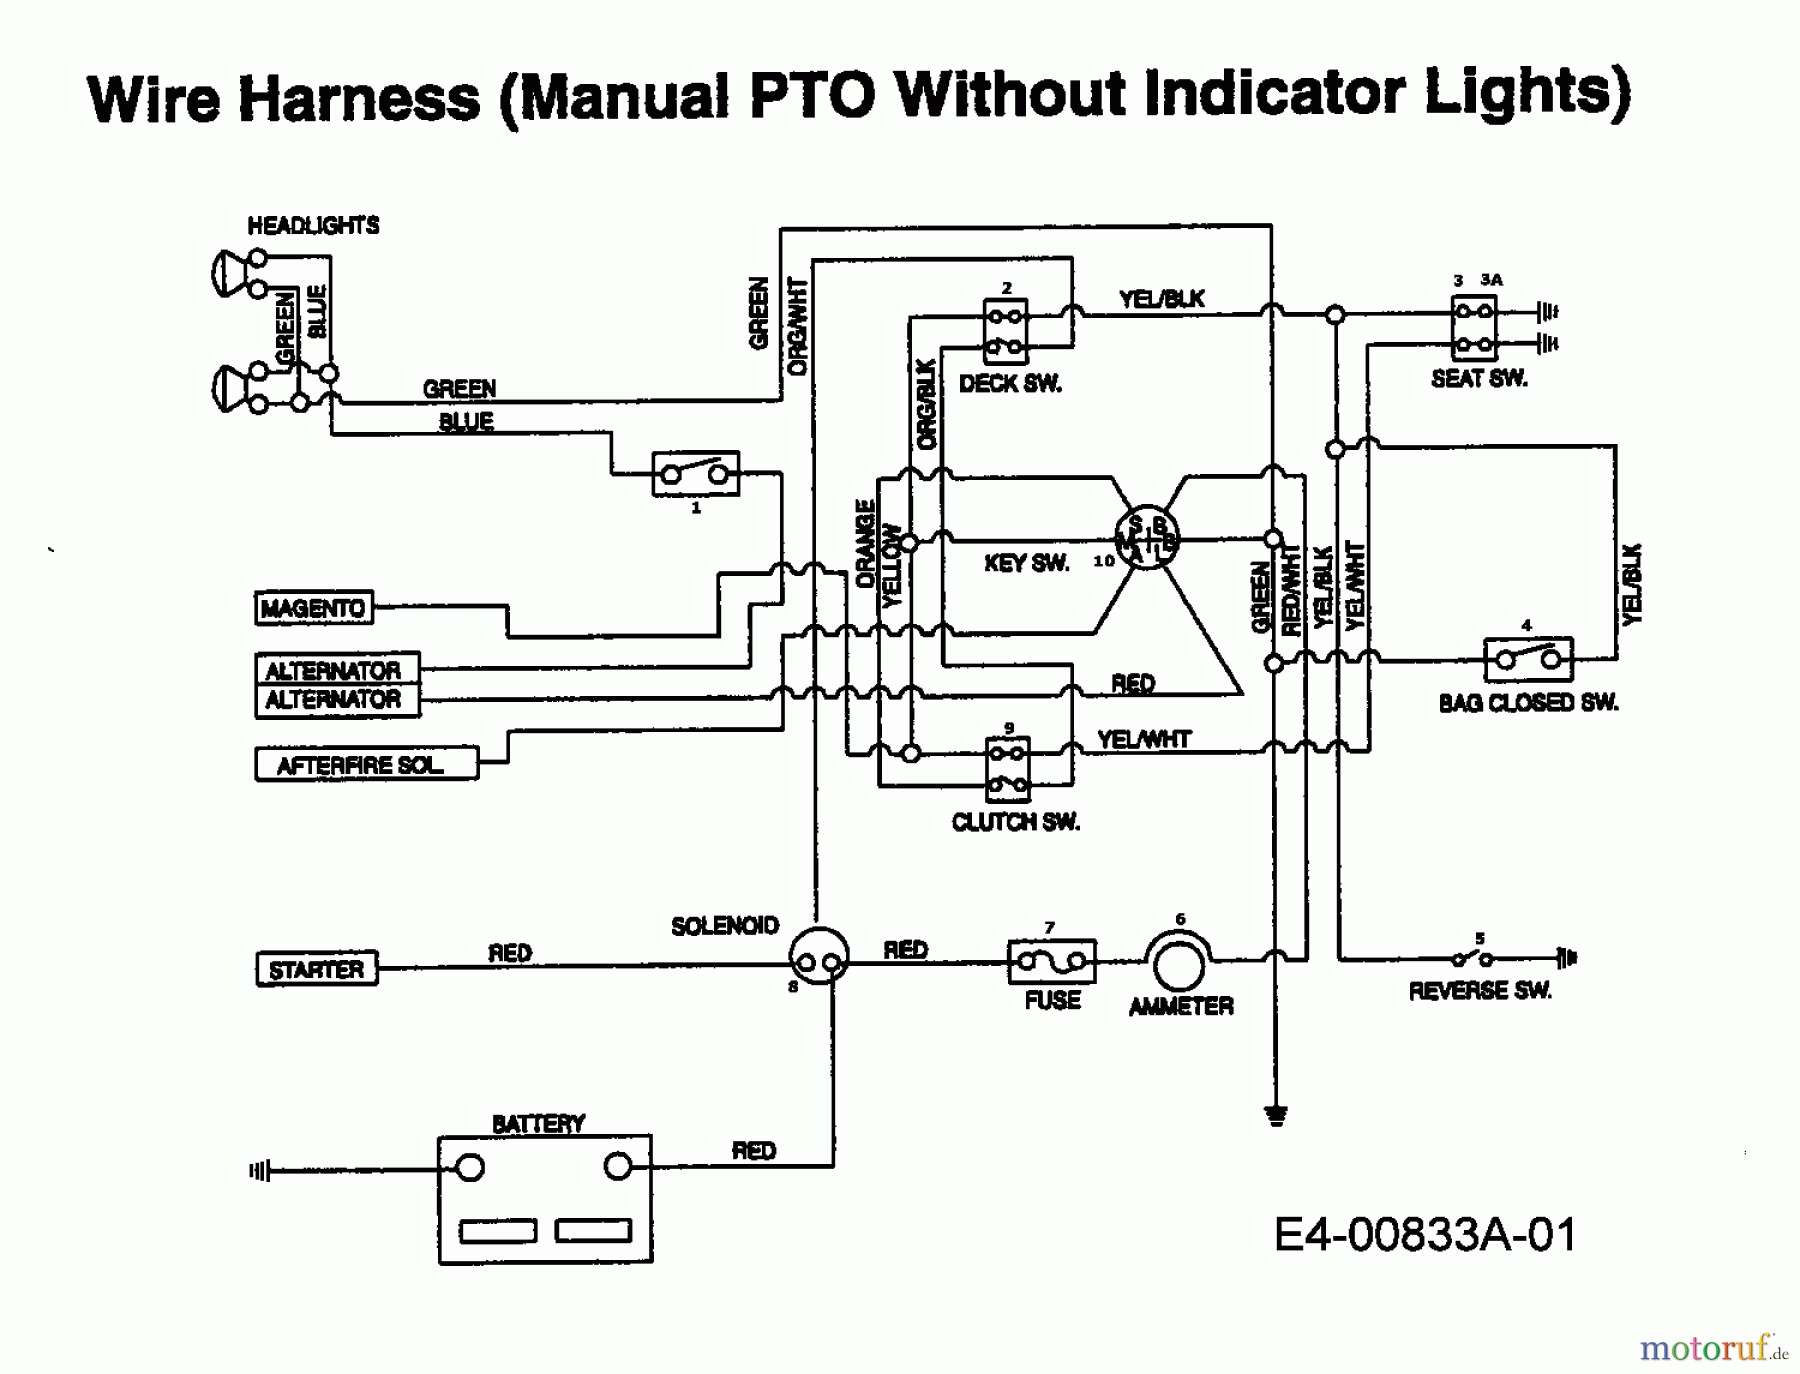  MTD Lawn tractors EH 160 13AT795N678  (1997) Wiring diagram without indicator lights